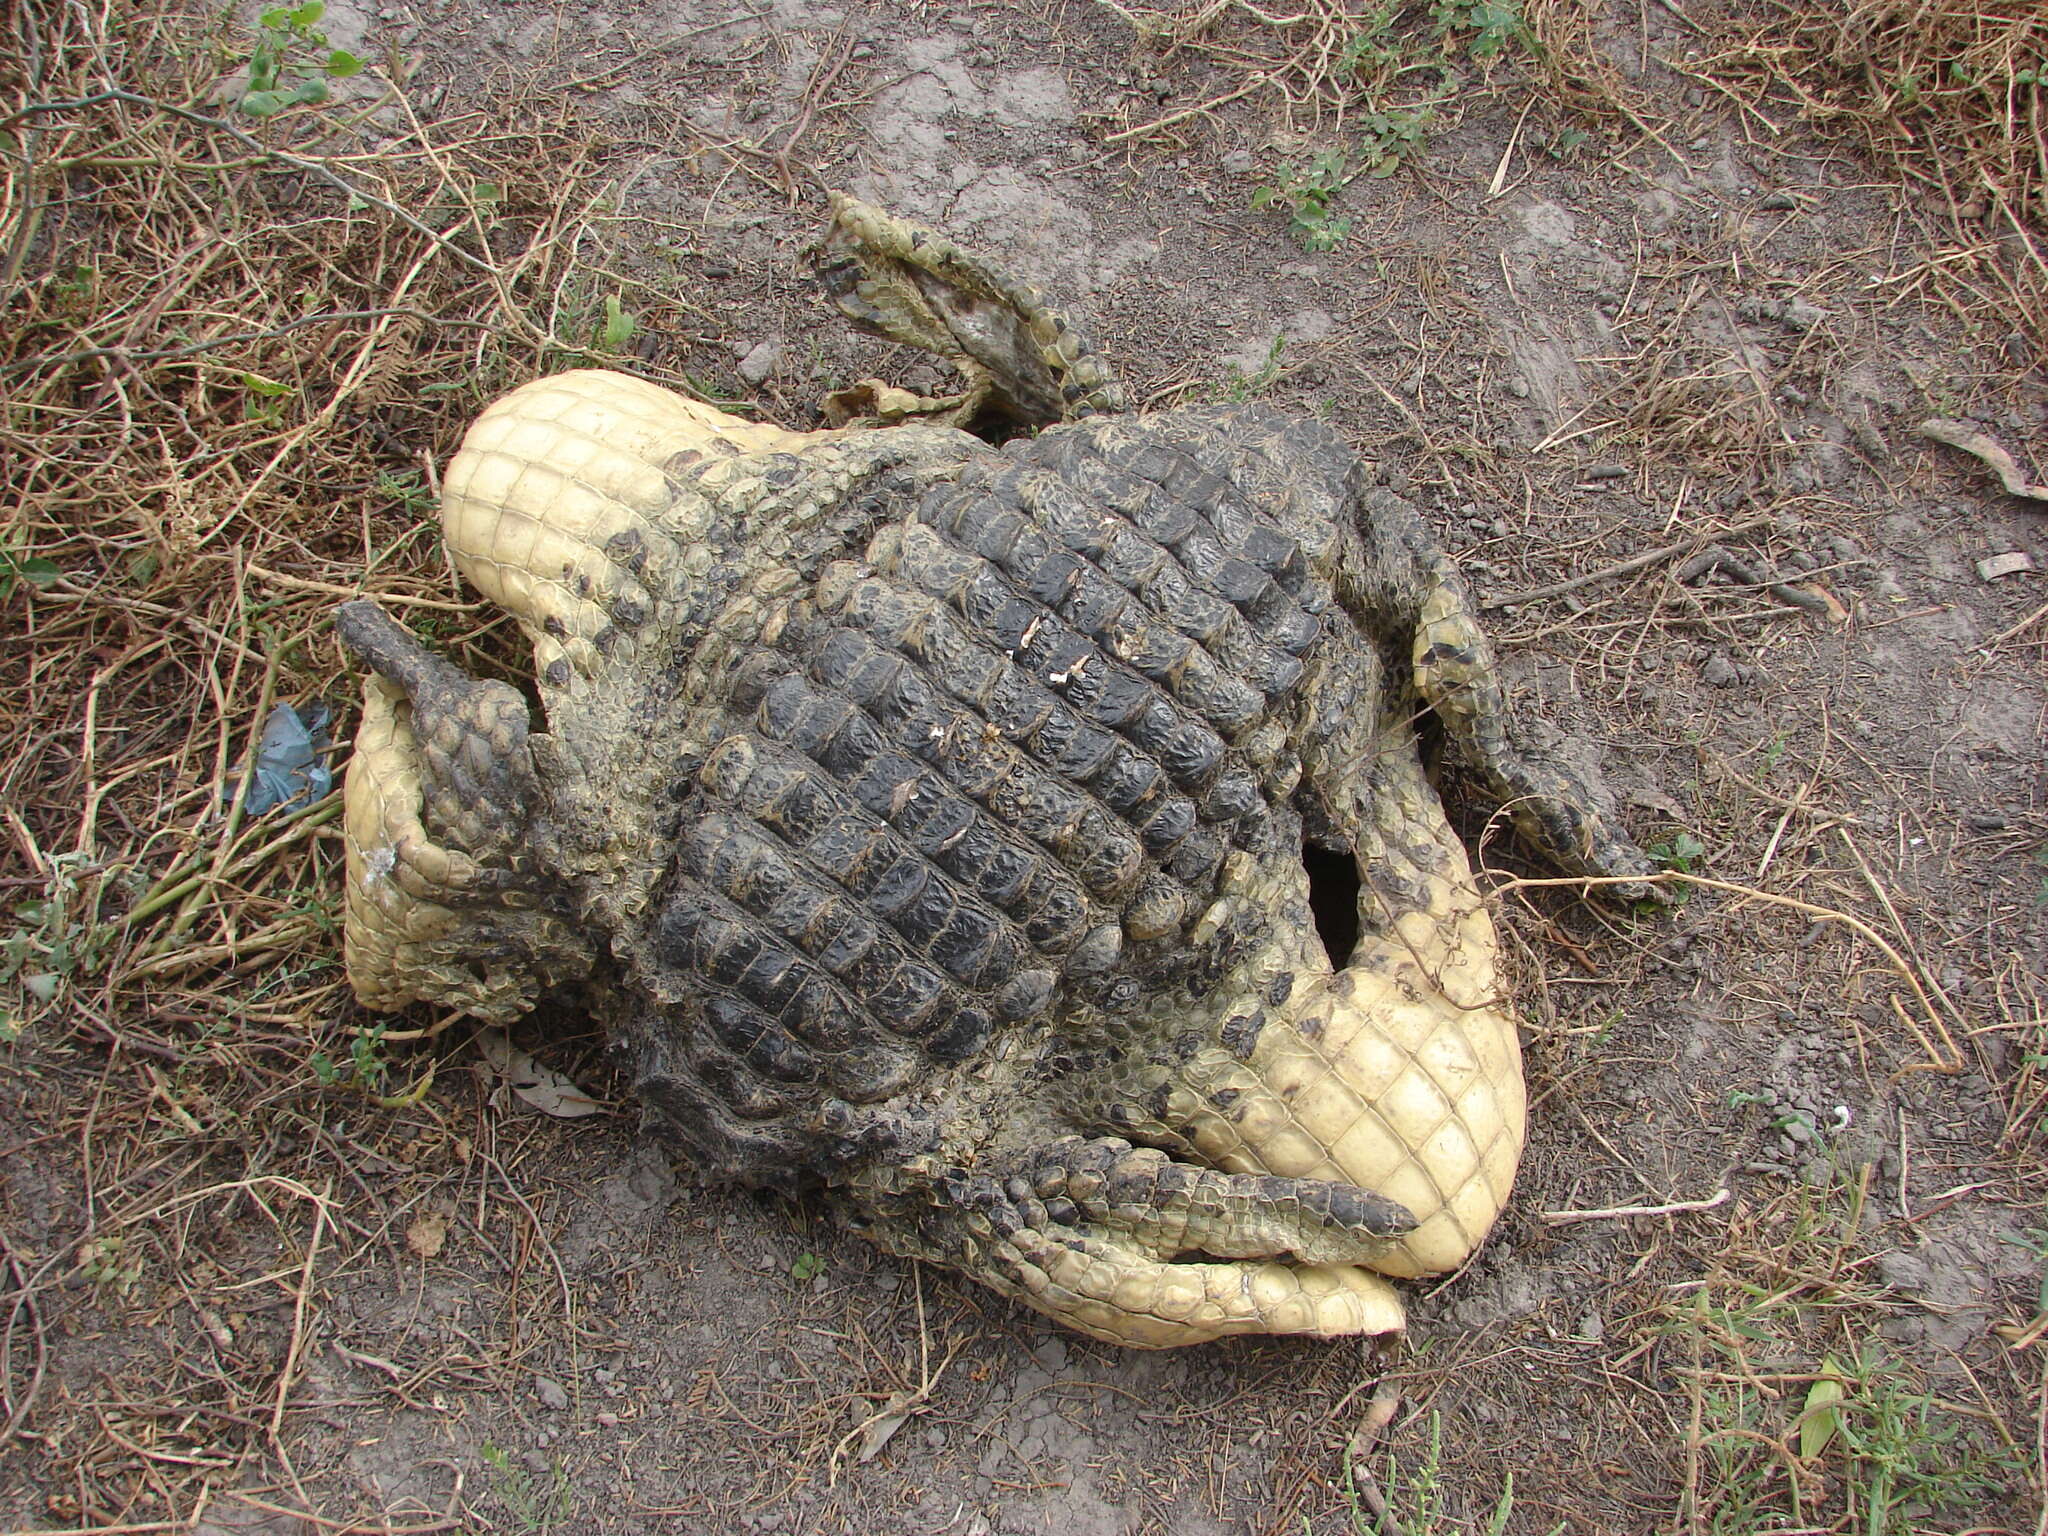 Image of Broad-snouted Caiman